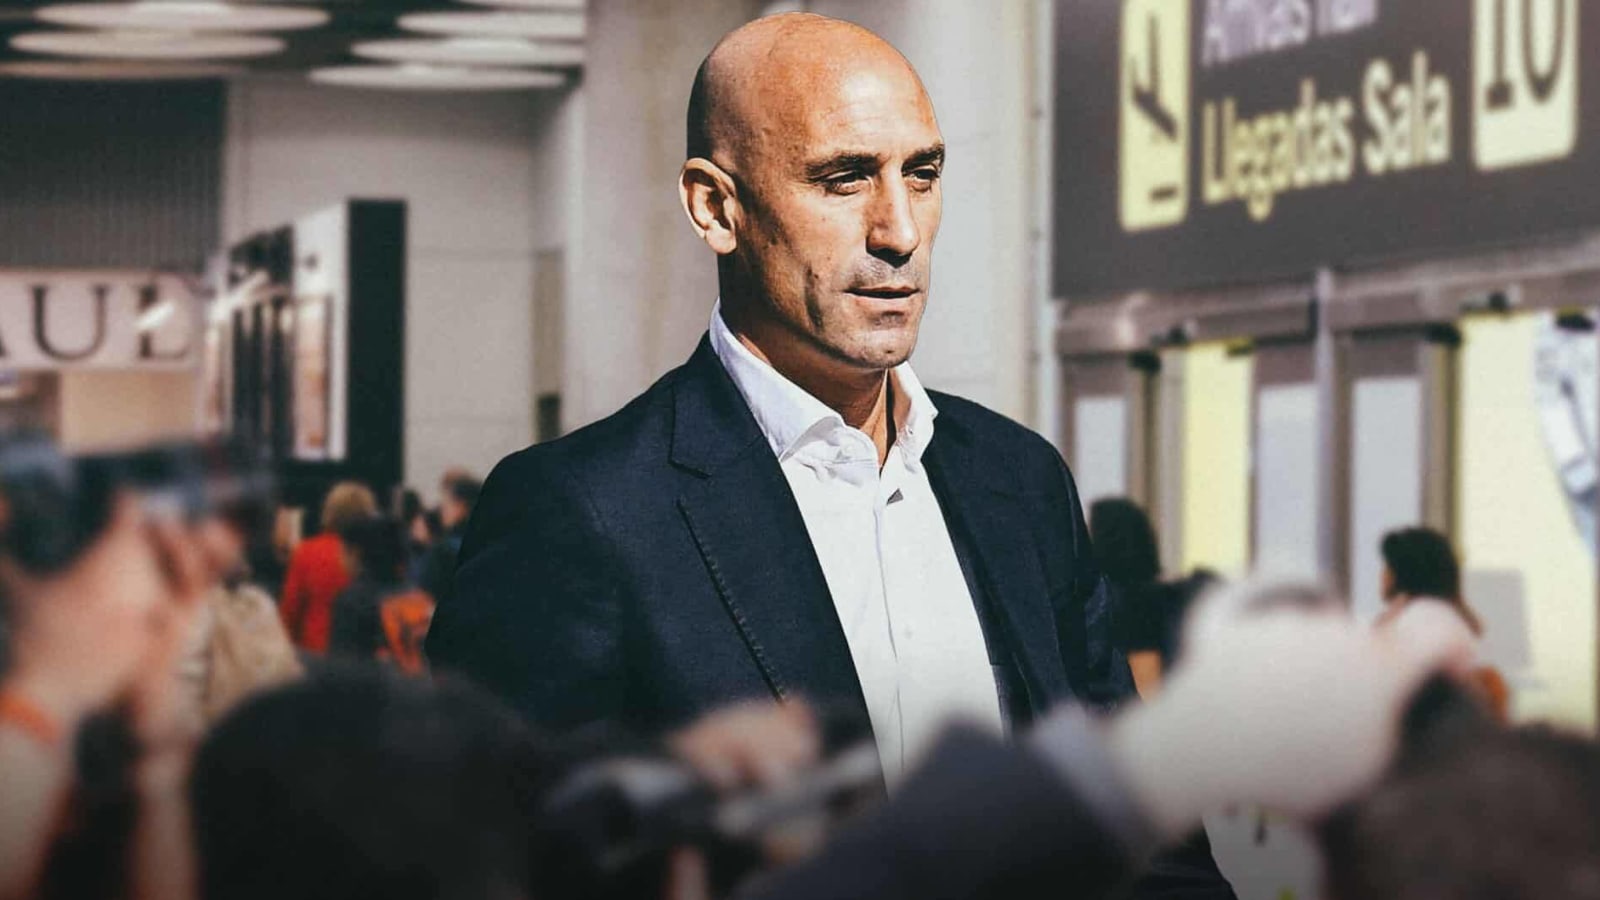 Former Spanish FA chief Luis Rubiales detained at Madrid airport